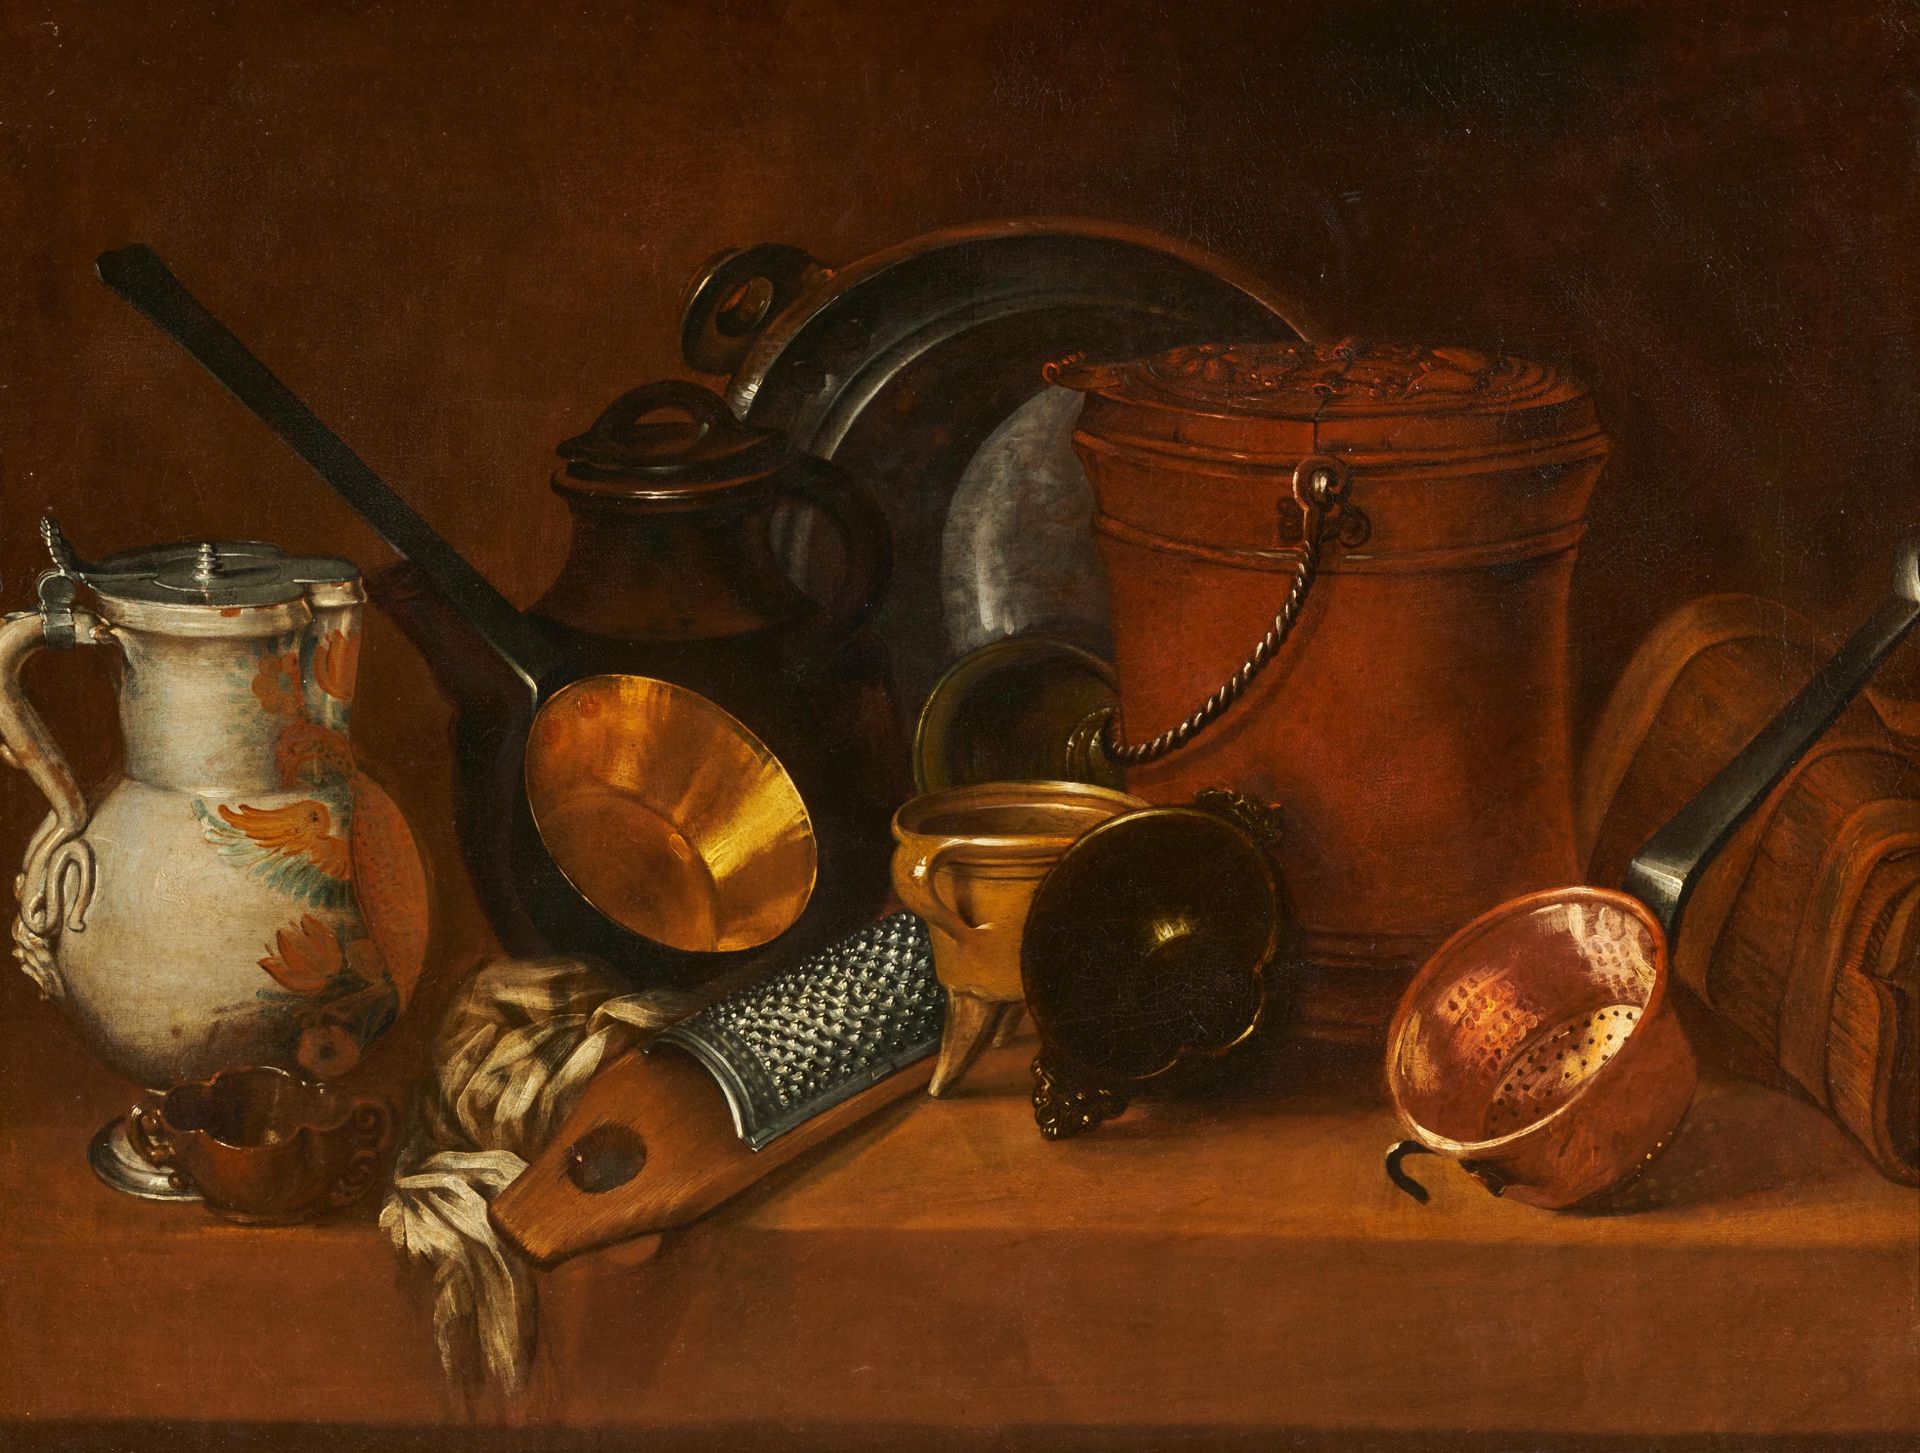 French School: Kitchen Still Life with Pots and Jugs